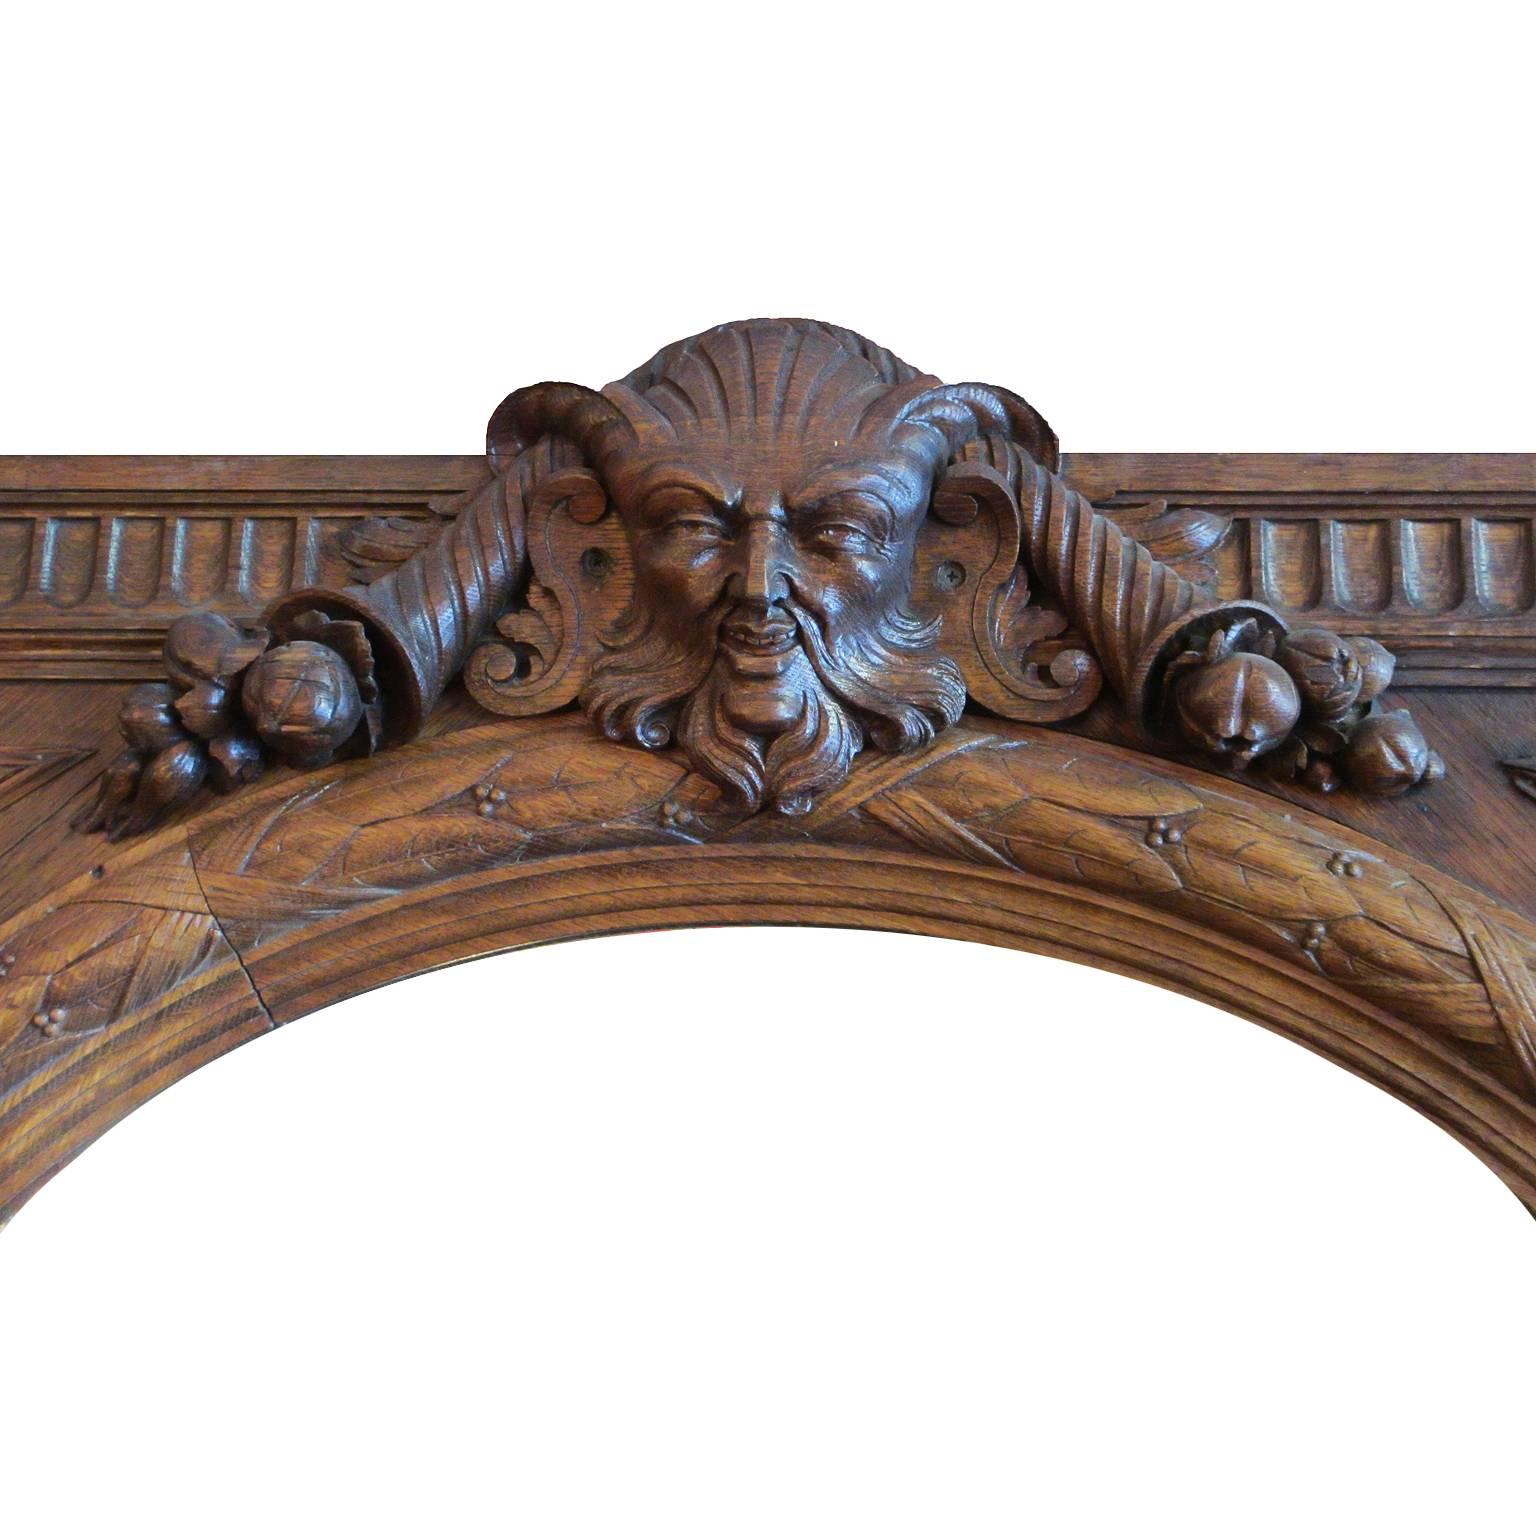 Italian Renaissance revival style 19th century carved oak figural mirror frame with a circular beveled mirror plate. The square shaped body with arrowhead corners, crowned with a carved allegorical mask of a bearded god flanked with cornucopias